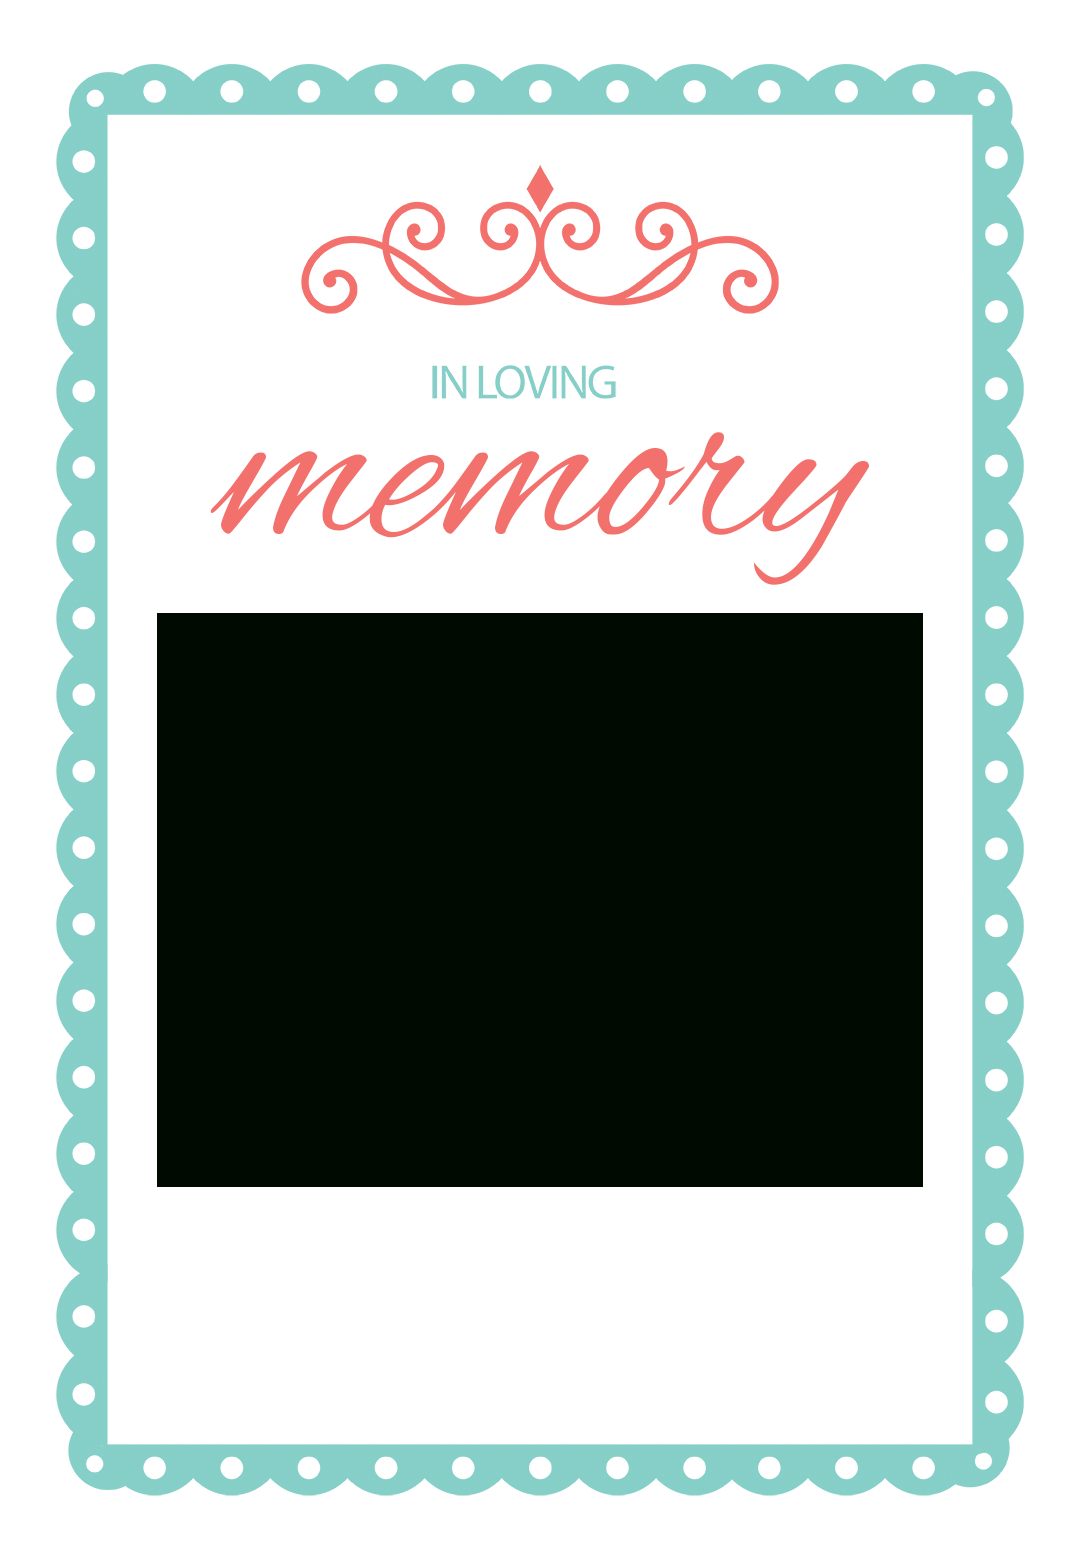 002 Free Memorial Cards Template Awful Ideas Funeral Card With Regard To Memorial Cards For Funeral Template Free